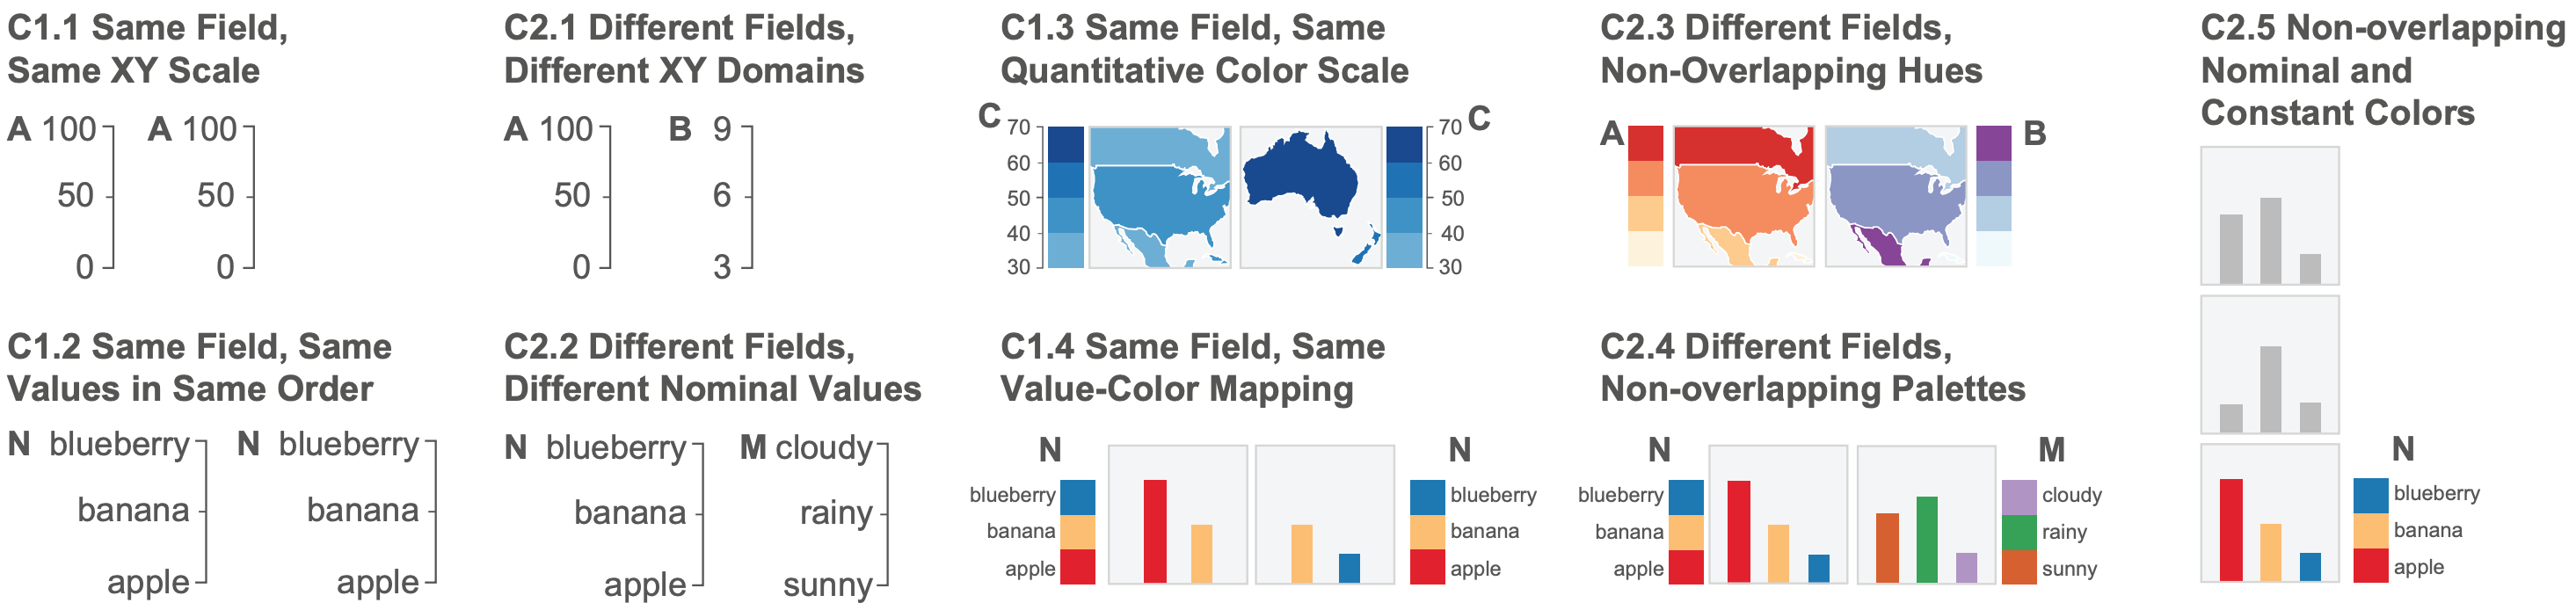 Visualizations that contain multiple views have multiple scales (e.g., xy scales, color scales). We develop and study authors' reactions to a model that formalizes visual encoding consistency between scale pairs as the above constraints. C1.1, C1.2, C2.1, and C2.2 require a pair of quantitative or nominal fields to be encoded using the same or different xy scales across two views depending on whether the fields are the same or different. Applying a similar logic to color, C1.3 and C1.4 require the same quantitative and nominal fields to have the same color scales. C2.3 requires different quantitative fields to have different hues, while C2.4 requires palettes of different nominal fields to not overlap. C2.5 requires nominal palettes to not include constant colors of other views.